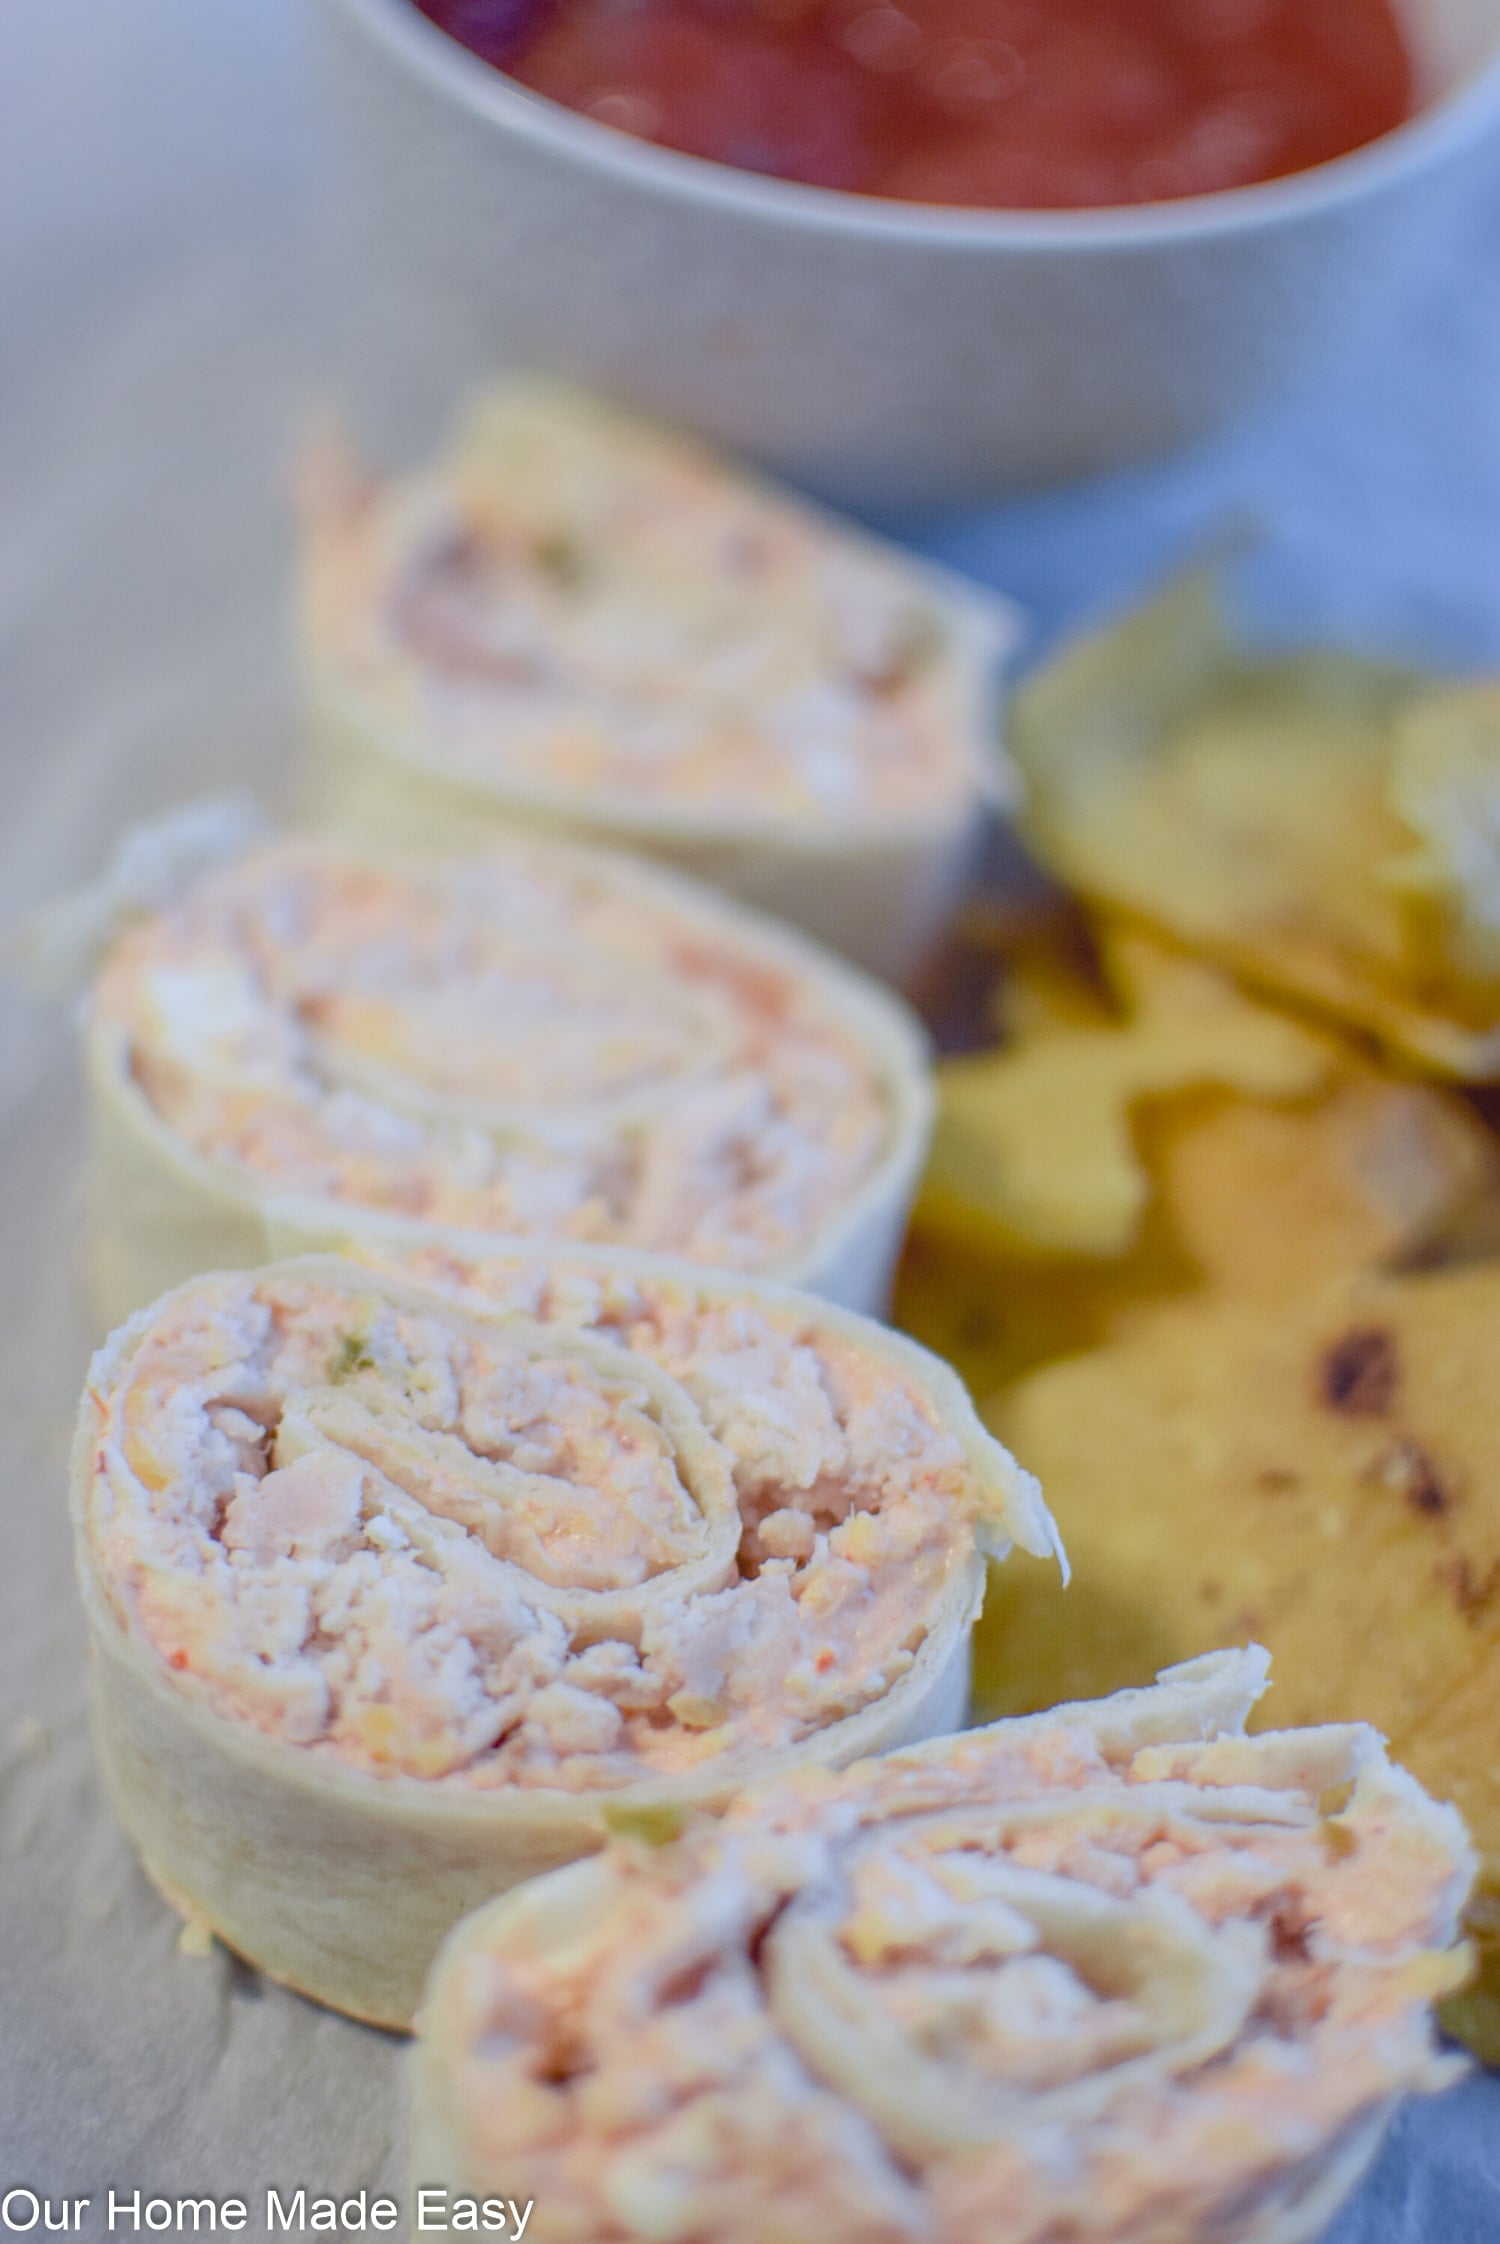 Make these easy chicken tortilla roll ups for a light lunch, after school snack, or easy dinner with a side of chips and veggies